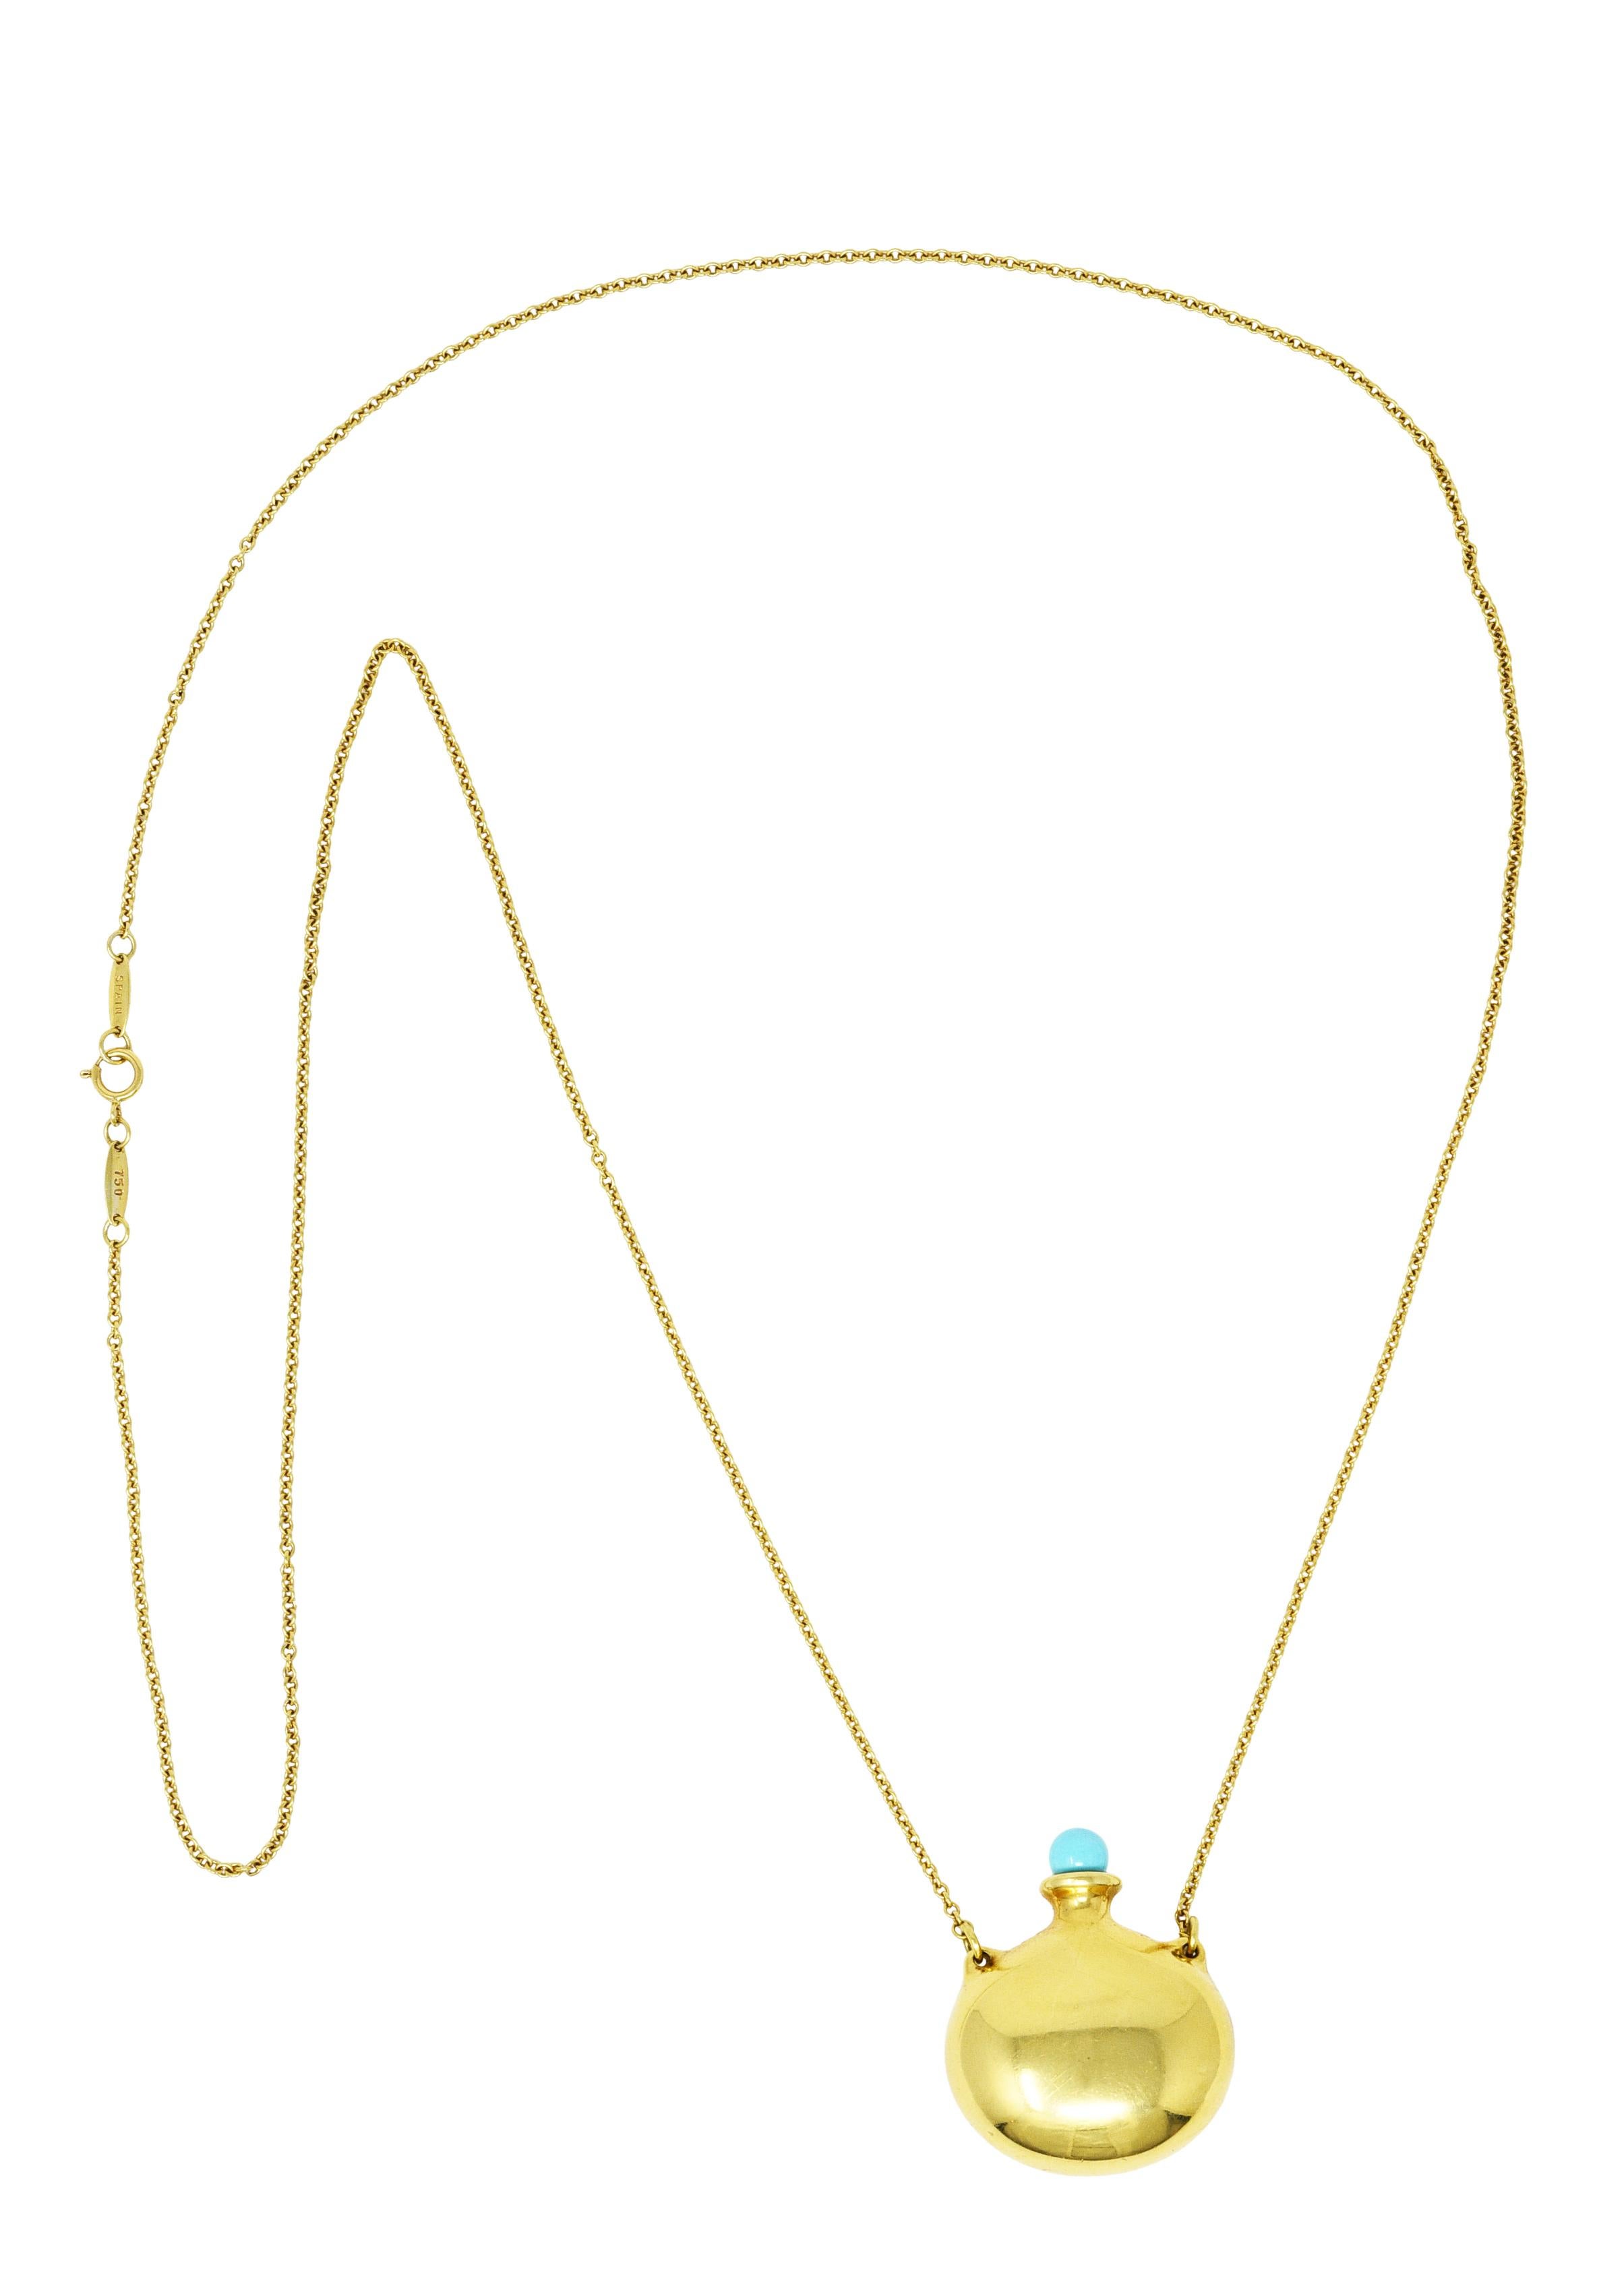 Necklace comprised of 1.5 mm cable chain 

Suspending a rounded high polished gold perfume bottle 

Perfume bottle is functional with threaded perfume wand and stopper 

Featuring a 6.0 mm round turquoise topped stopper - robin's egg blue in color